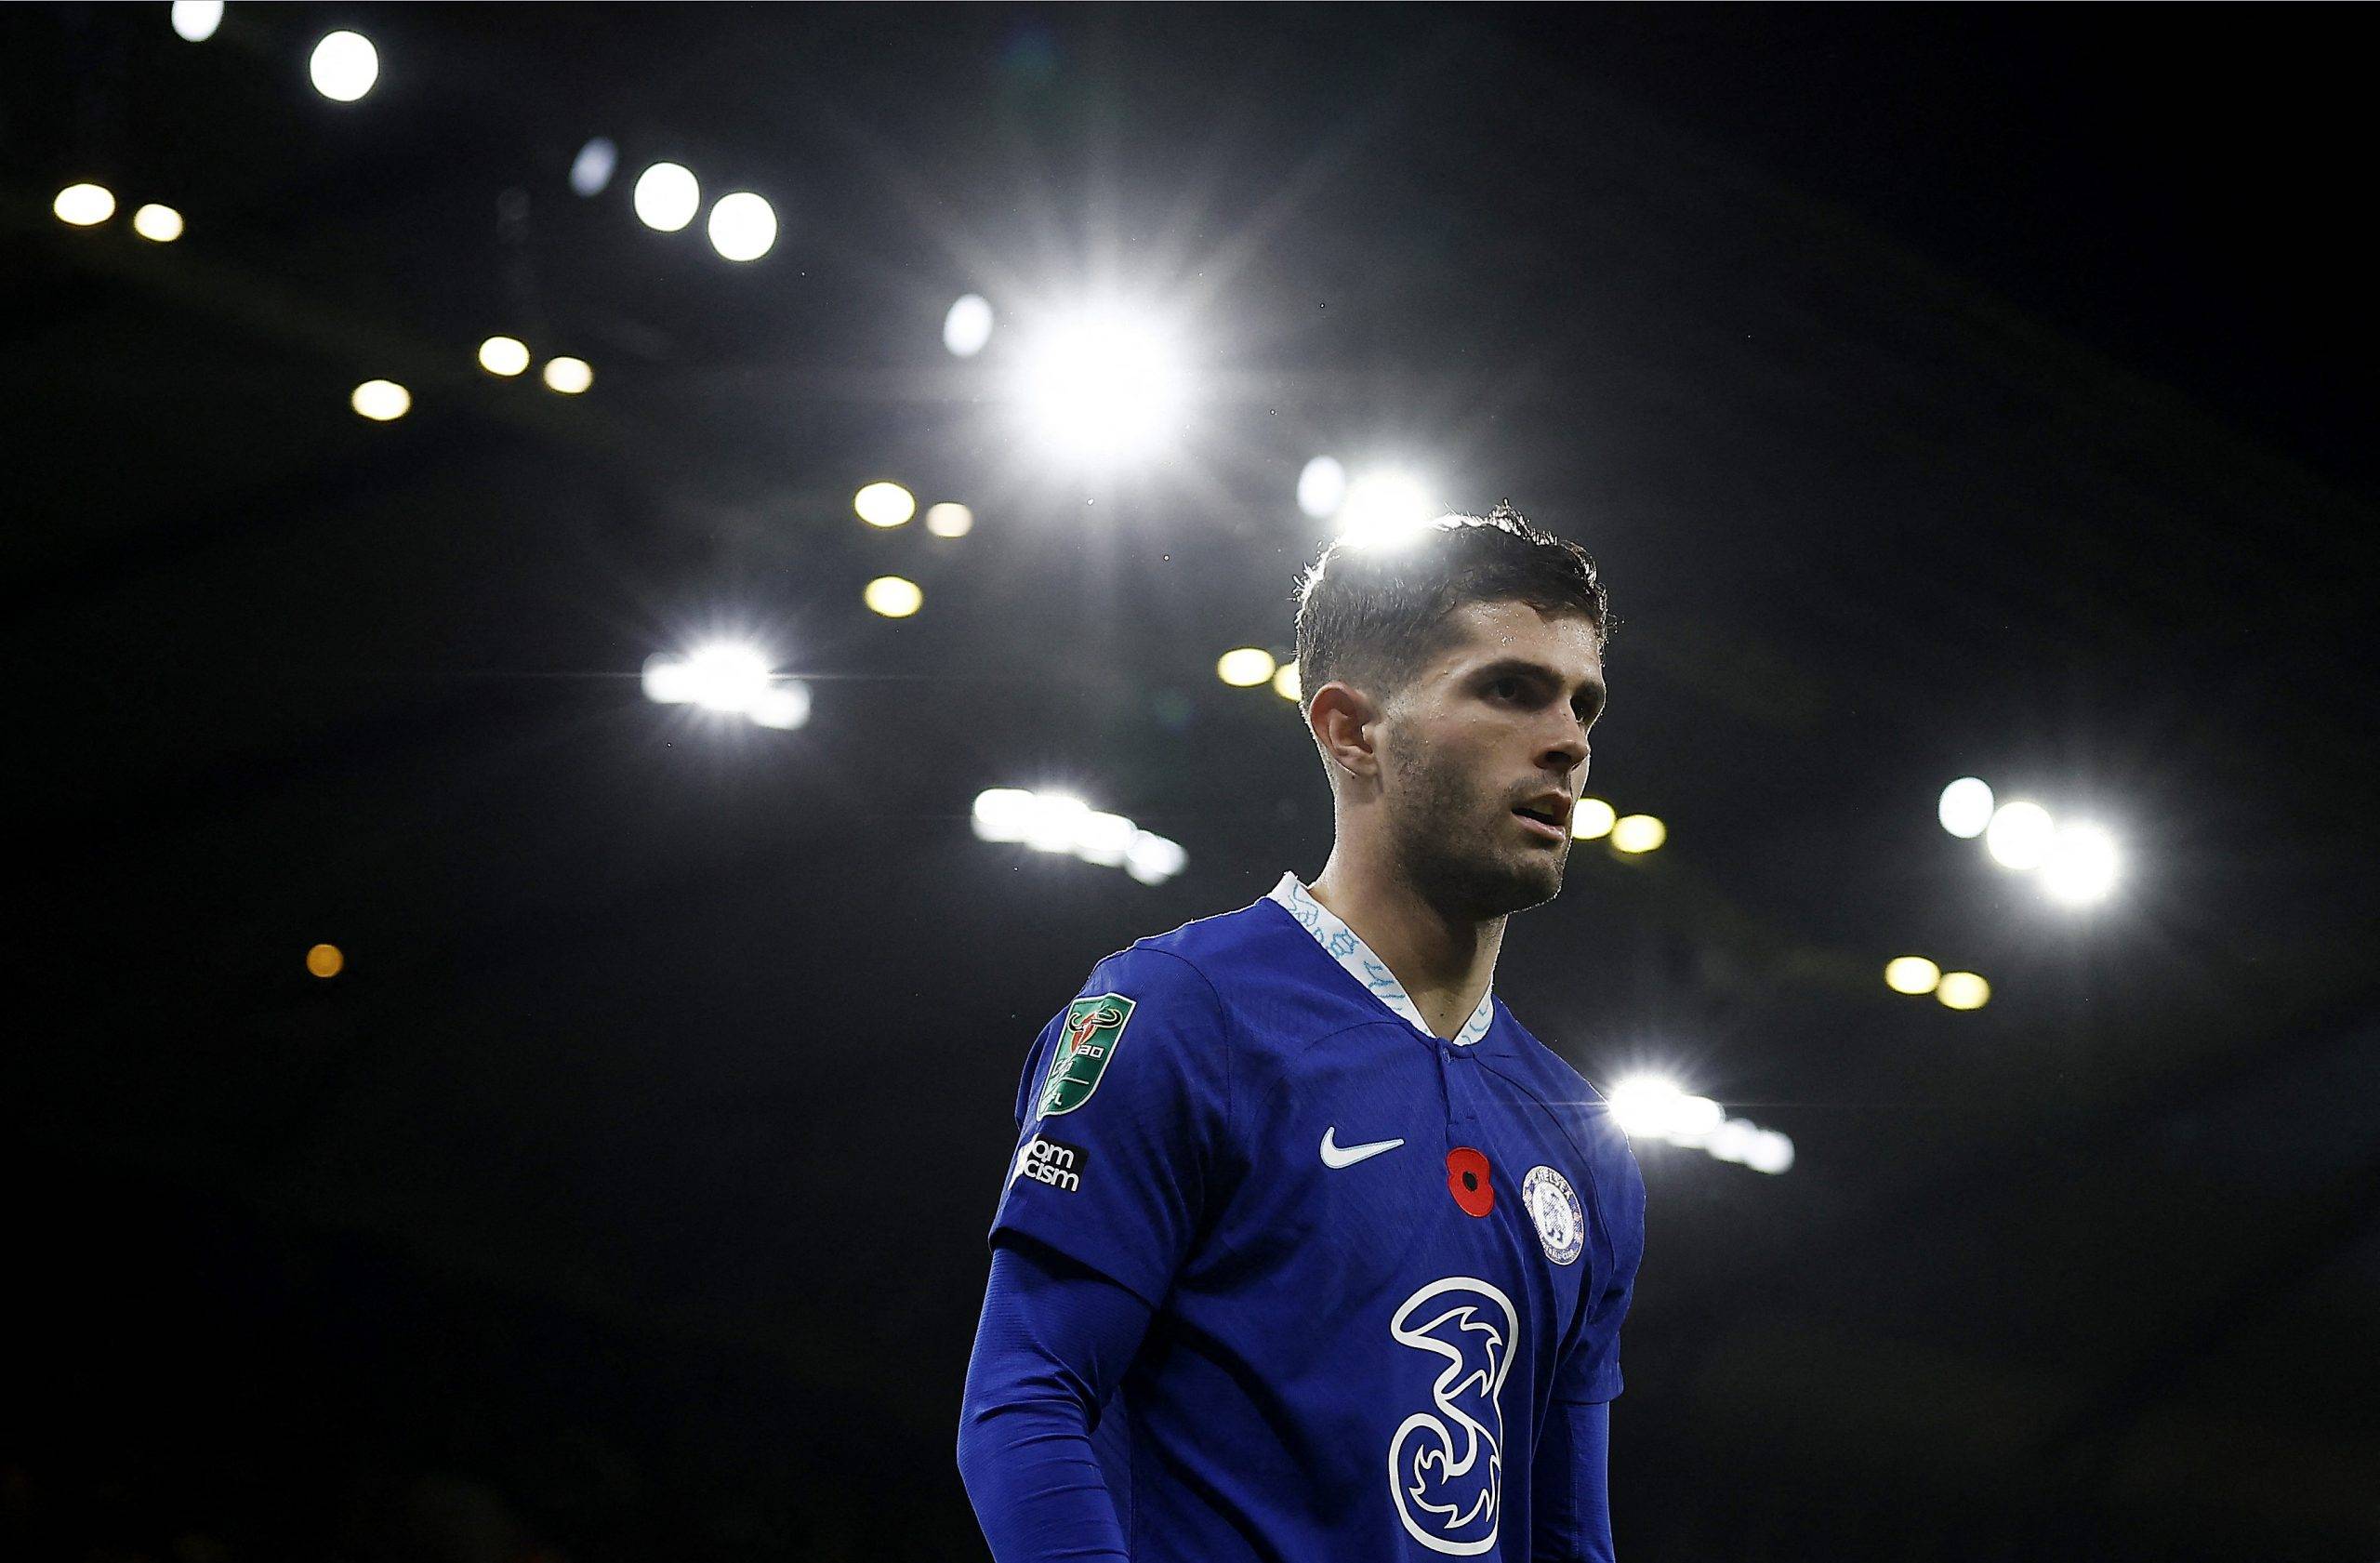 Newcastle United: Magpies retain Pulisic and Loftus-Cheek interest - Follow up